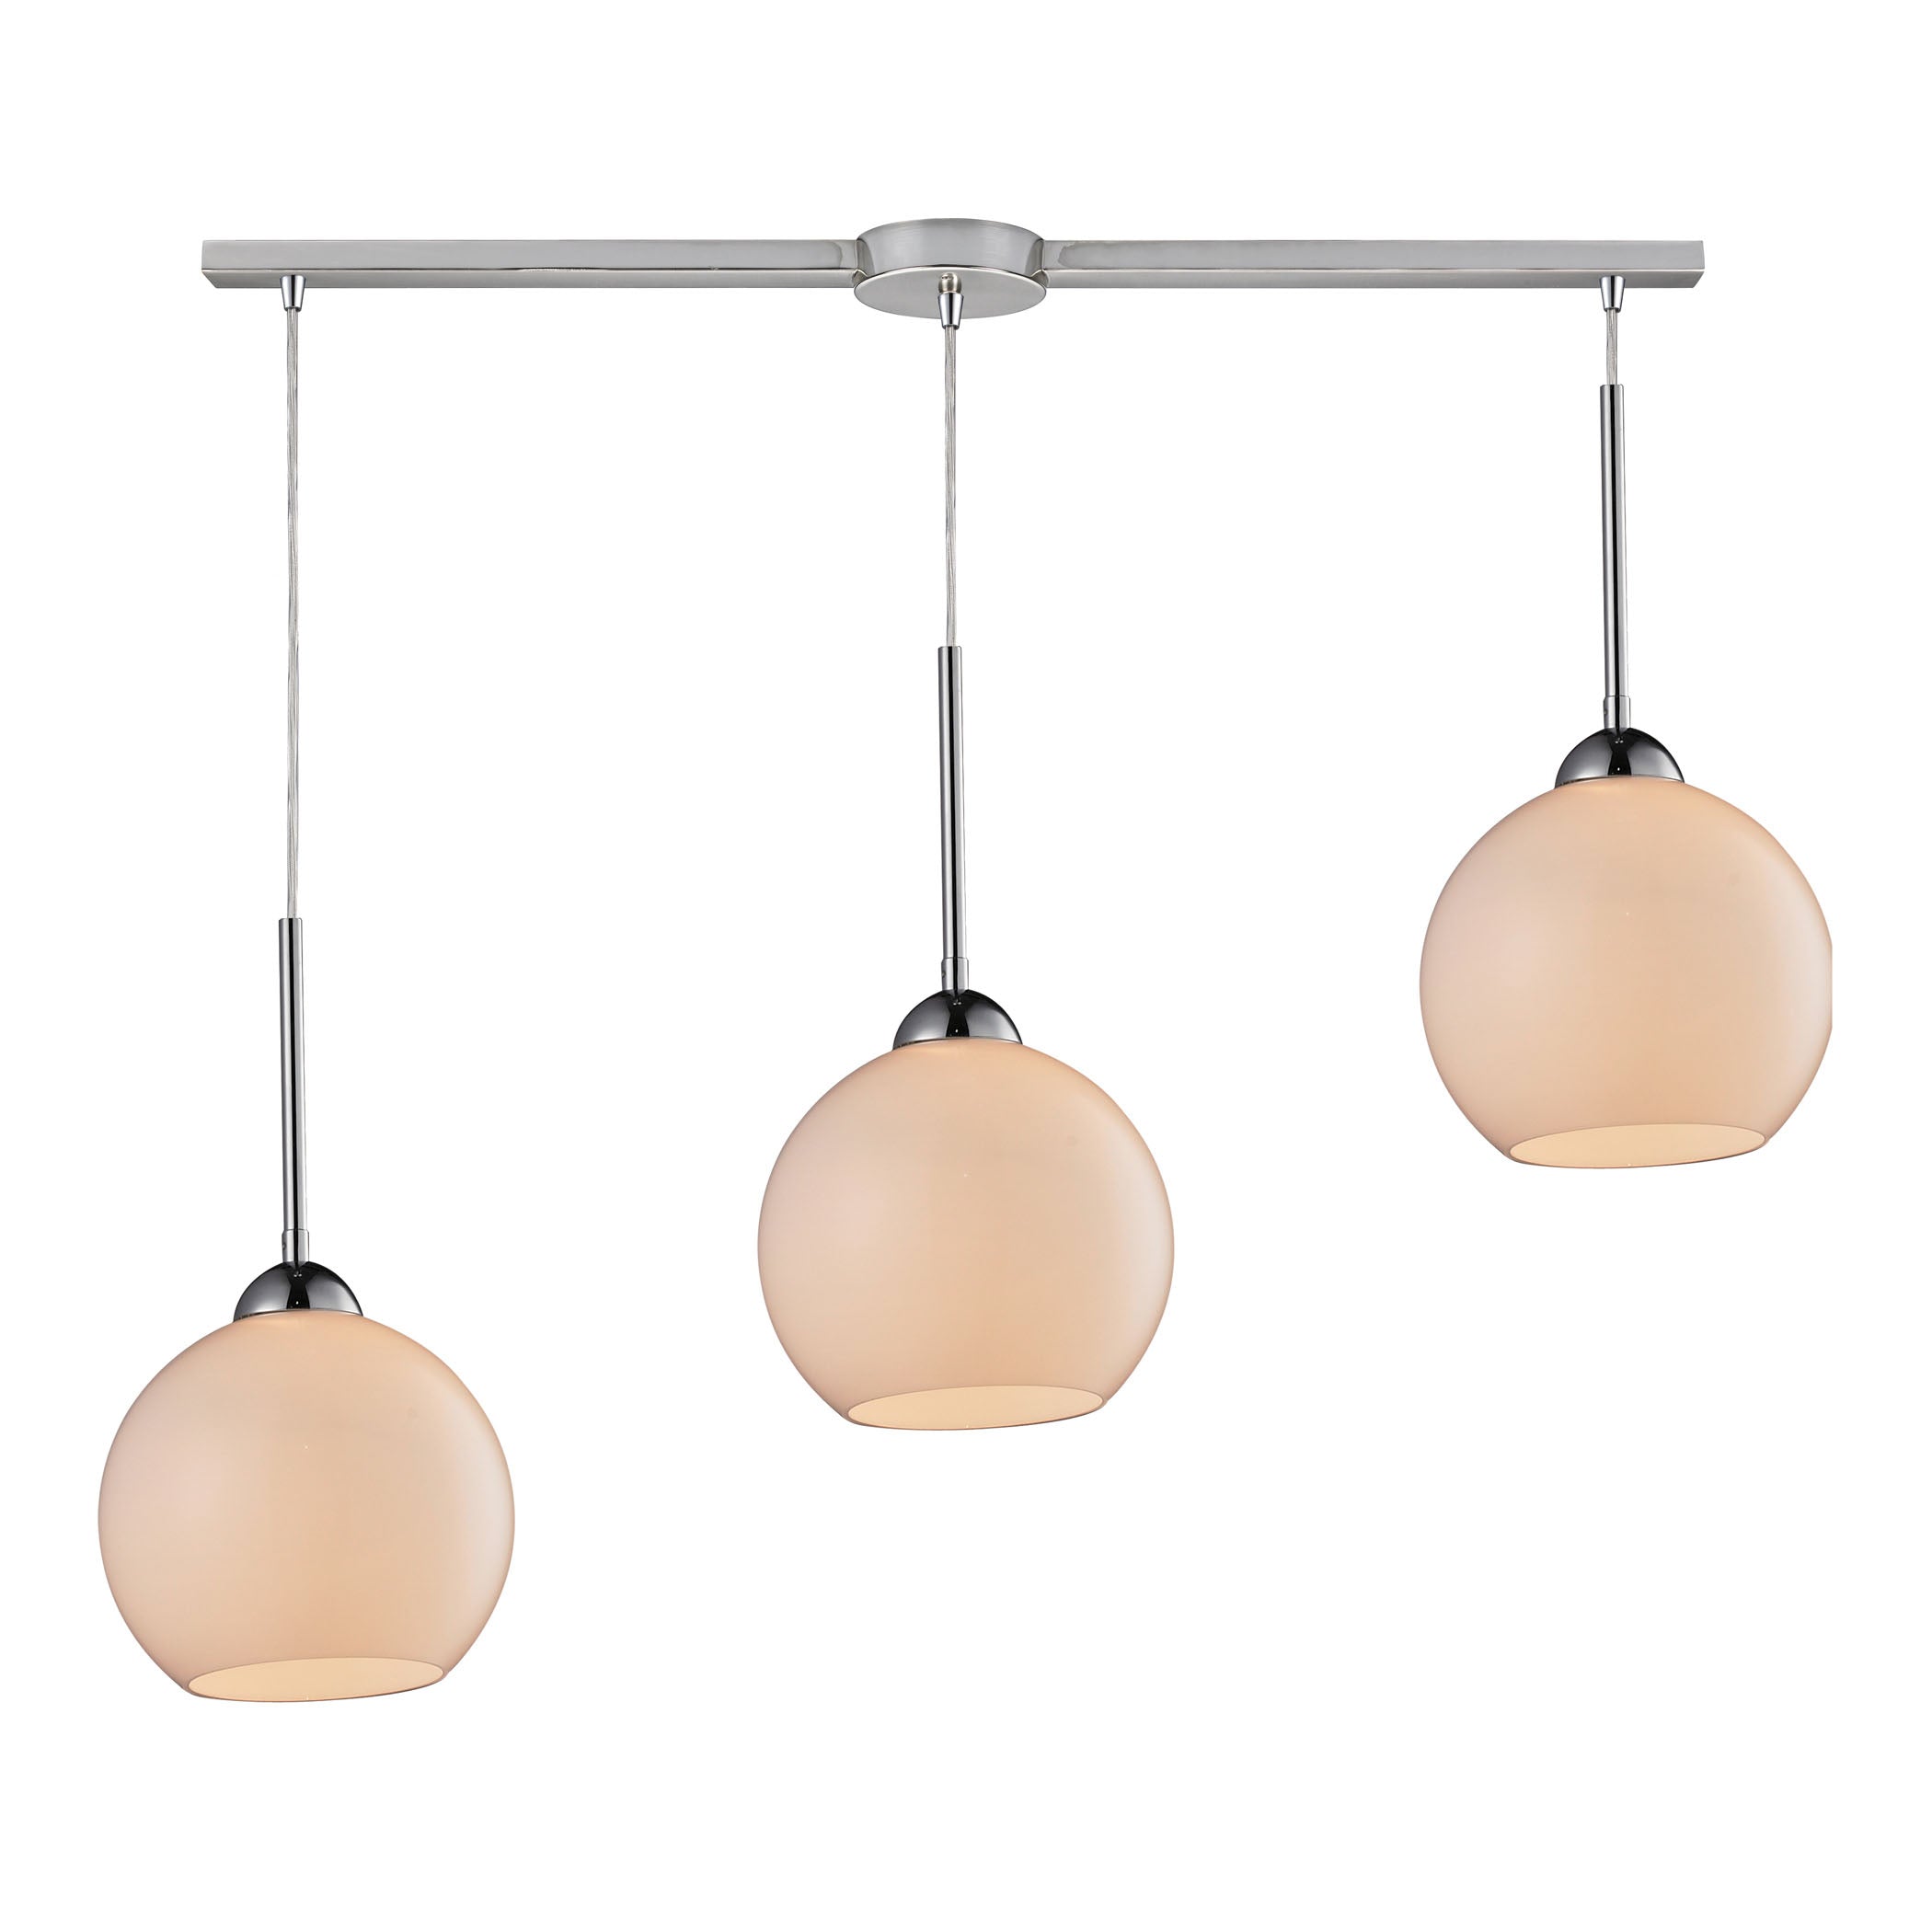 ELK Lighting 10240/3L-WH Cassandra 3-Light Linear Pendant Fixture in Polished Chrome with White Glass